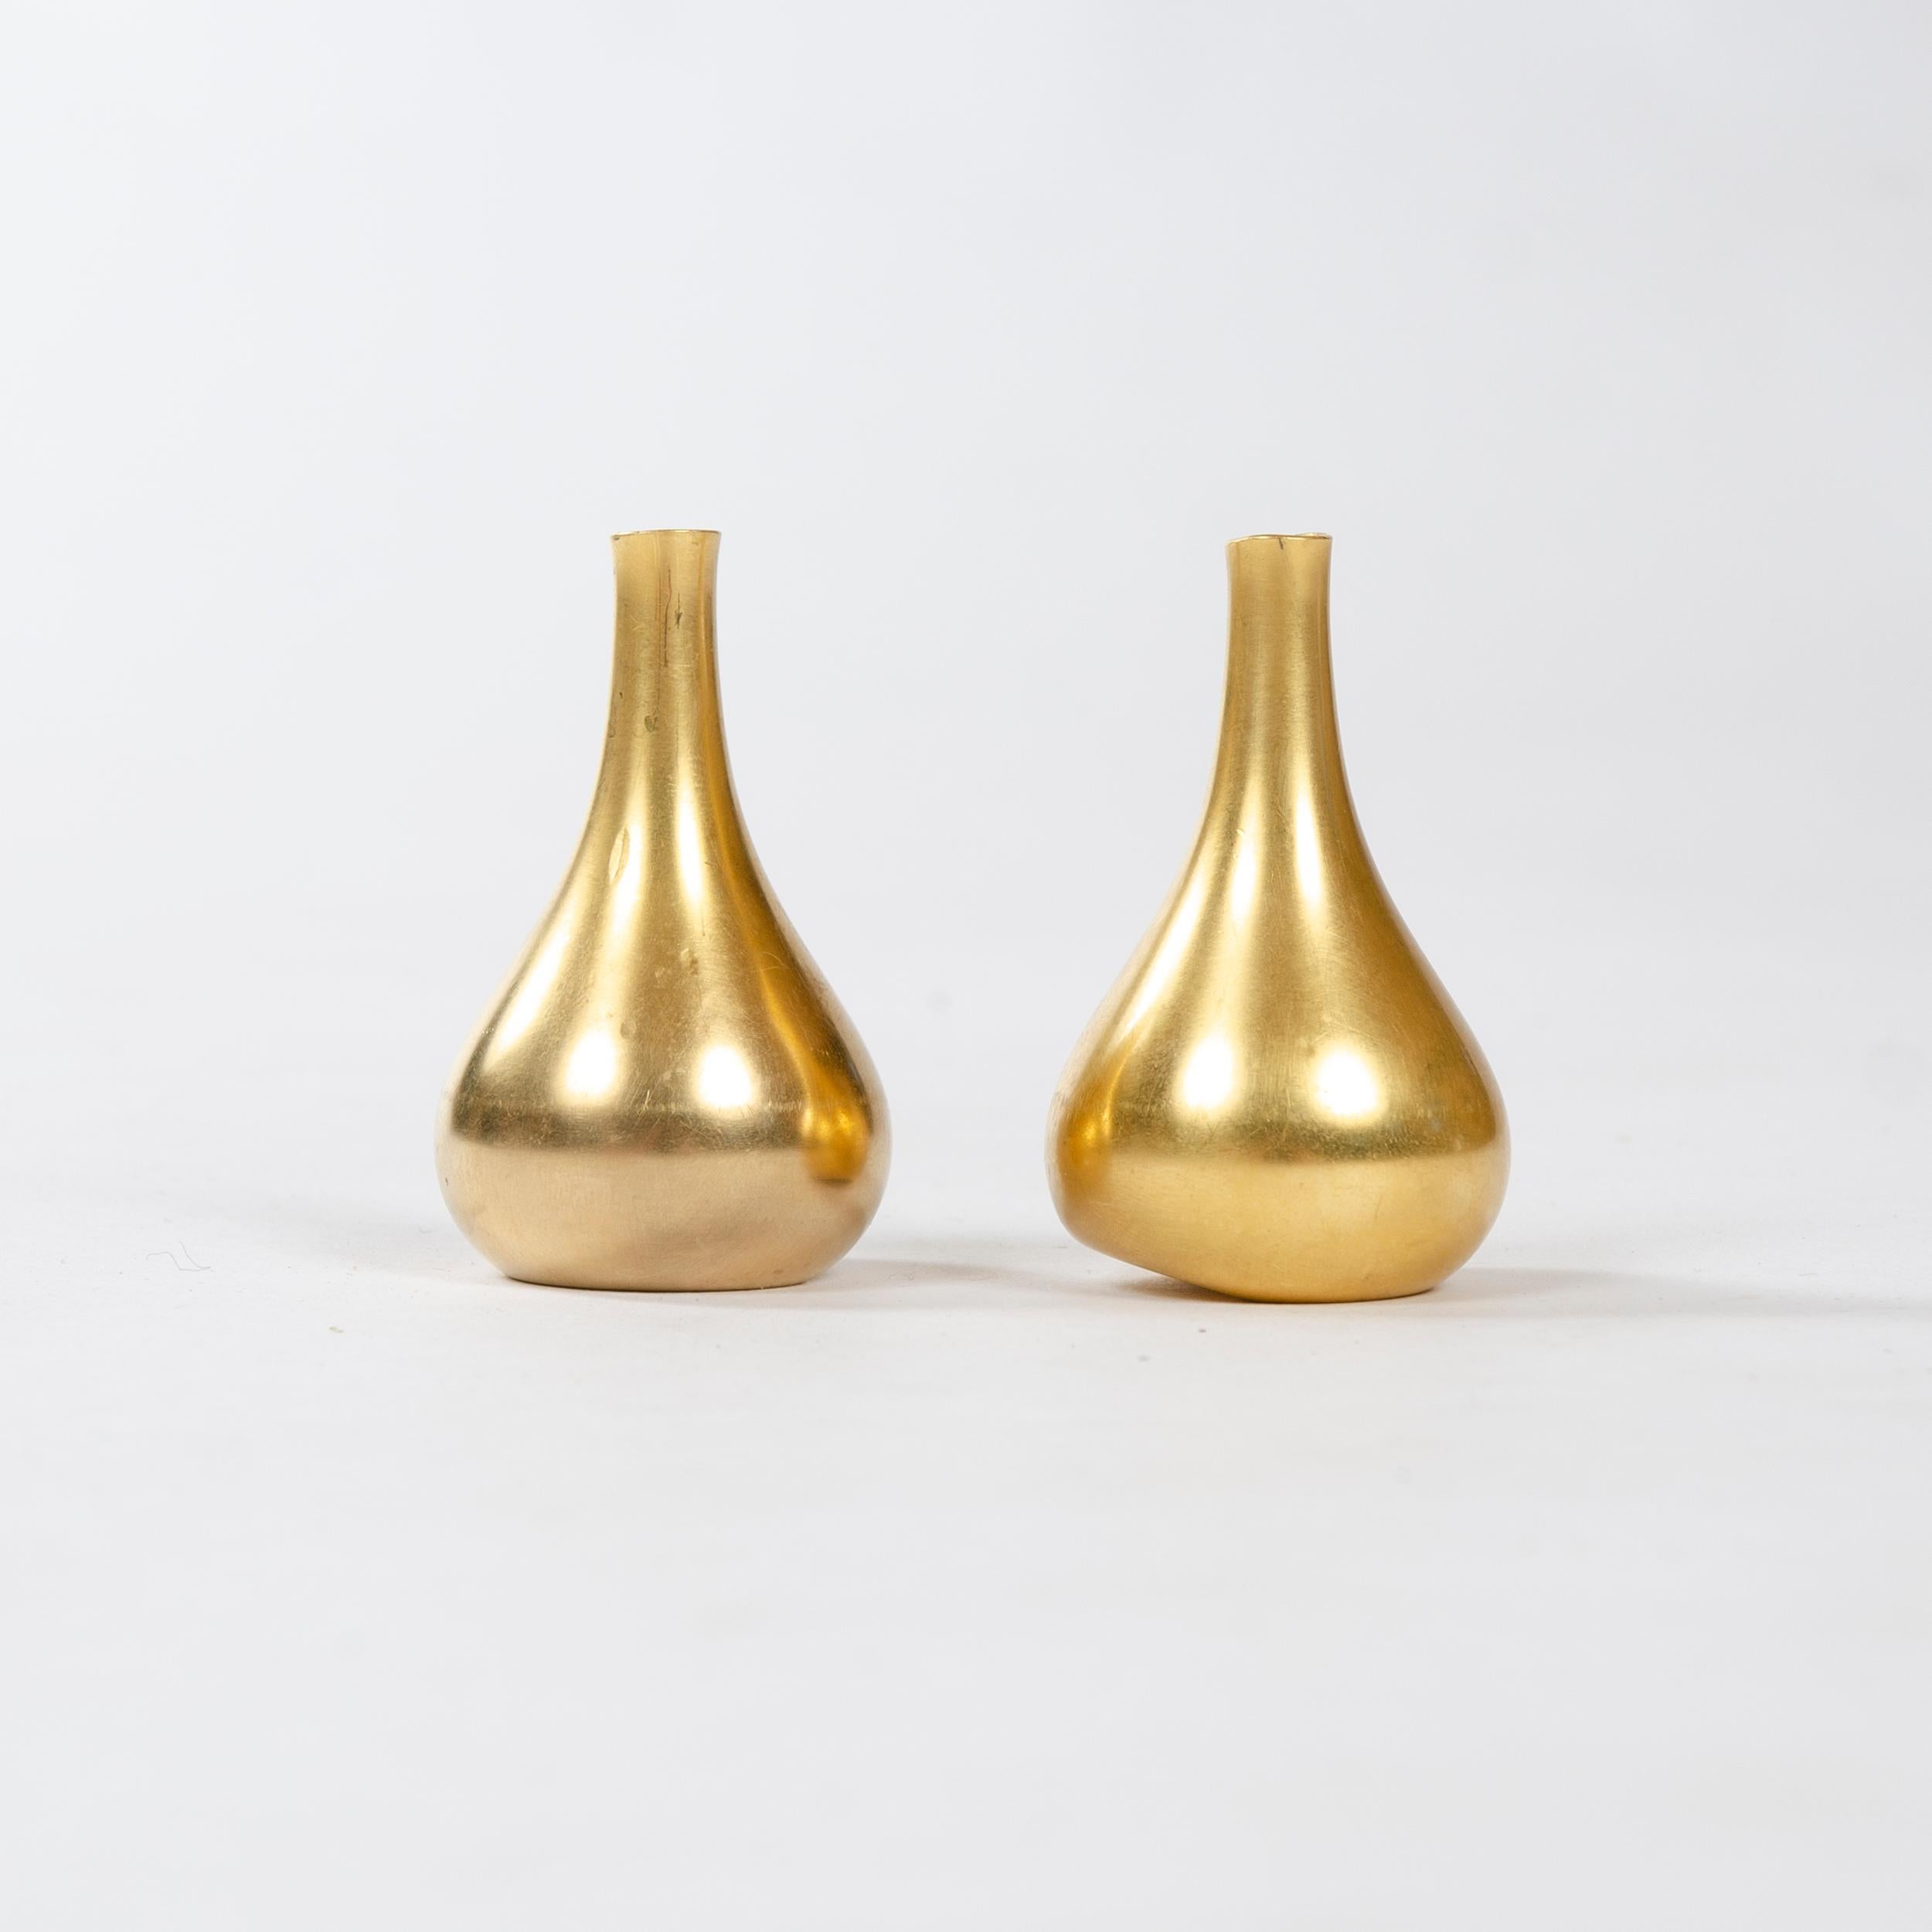 A pair of petite cast bronze candleholders with weighted and chamfered bottoms. Each stamped 